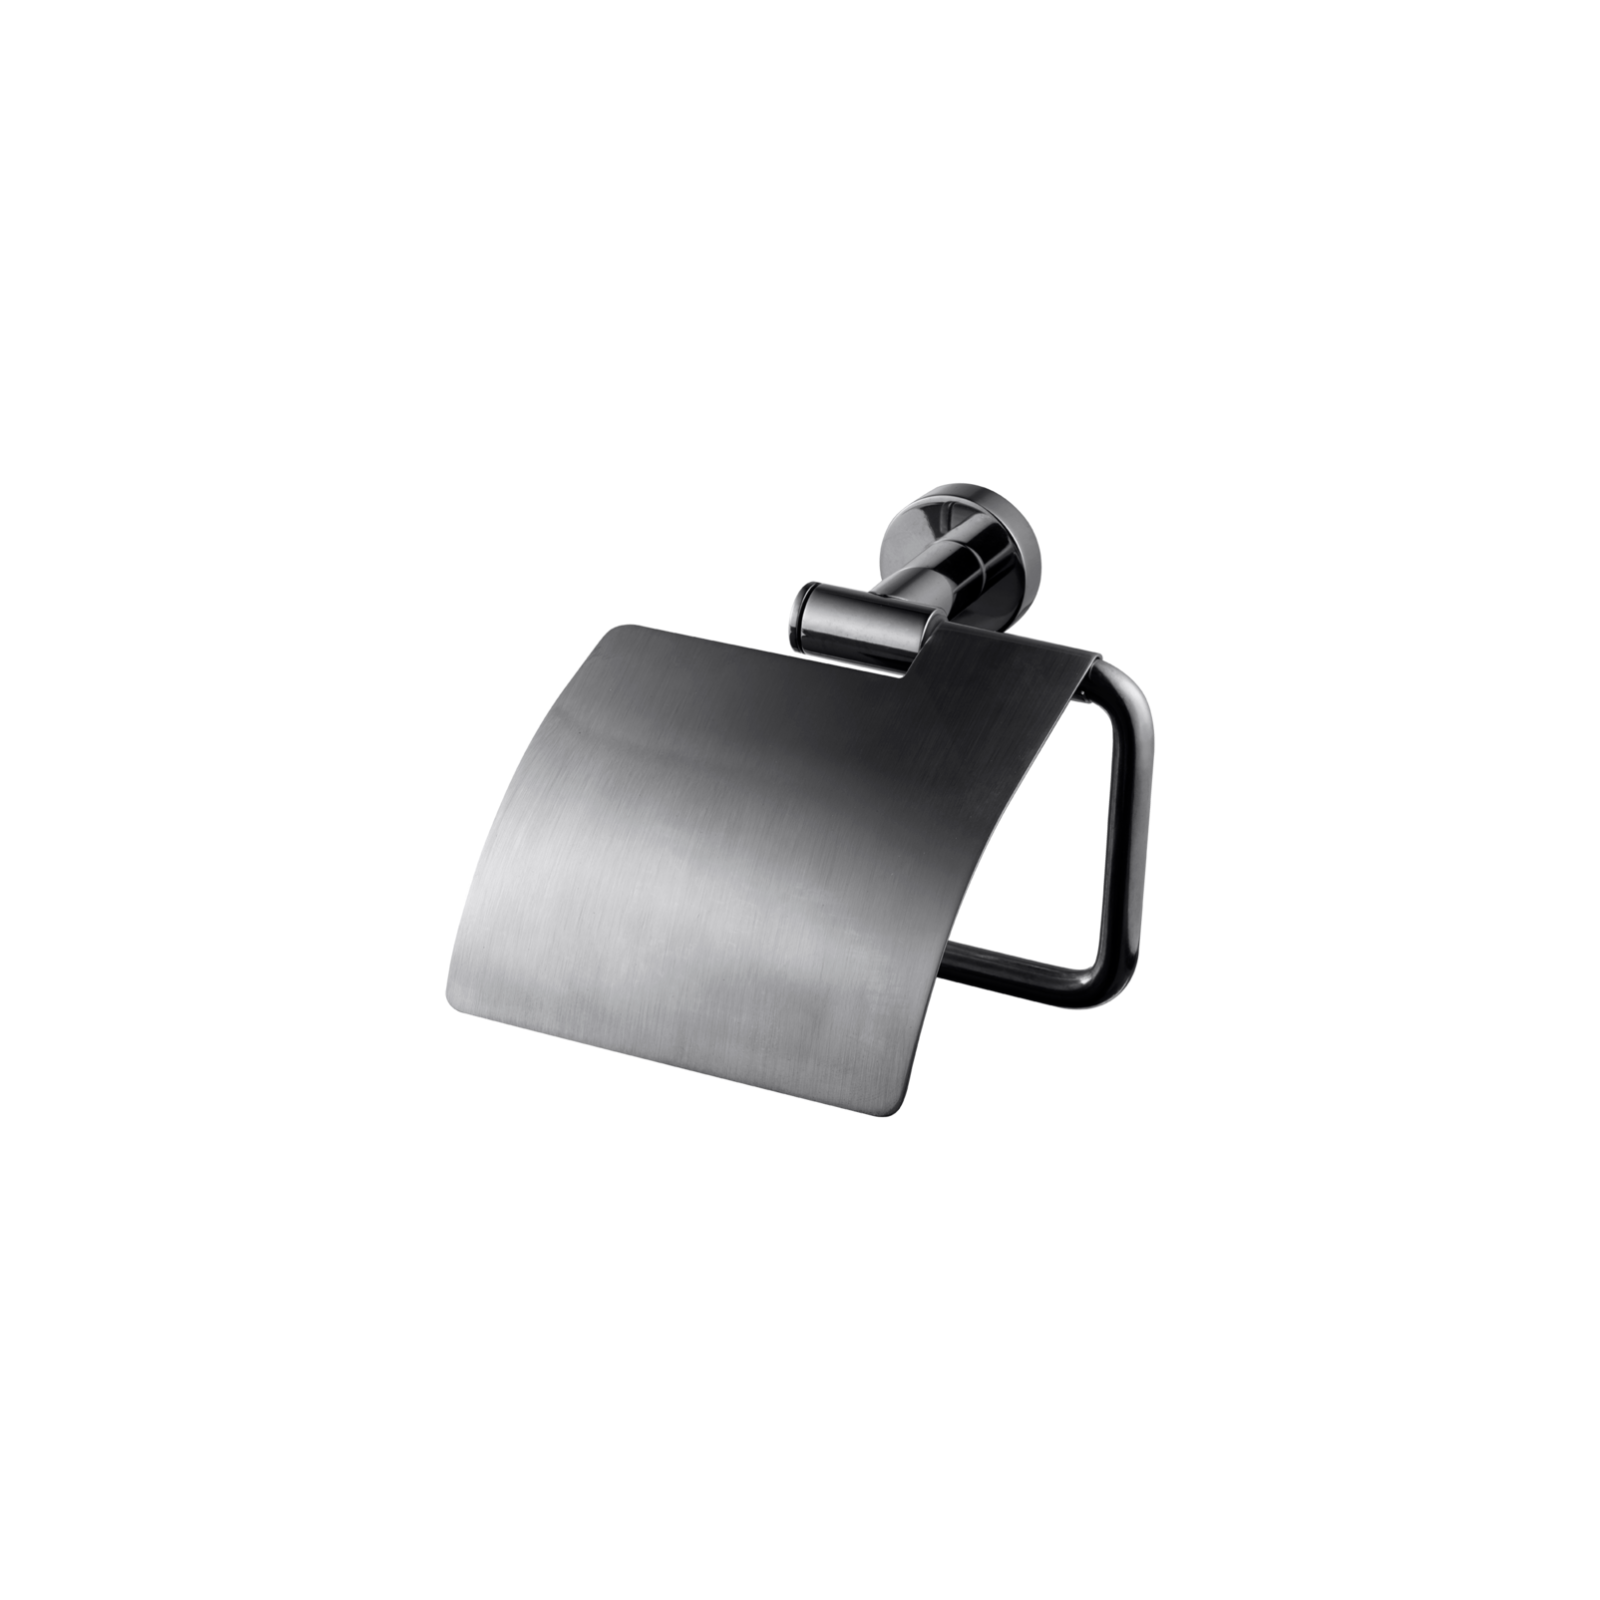 Tapwell Toalettpappershållare med lock TA236 Black chrome